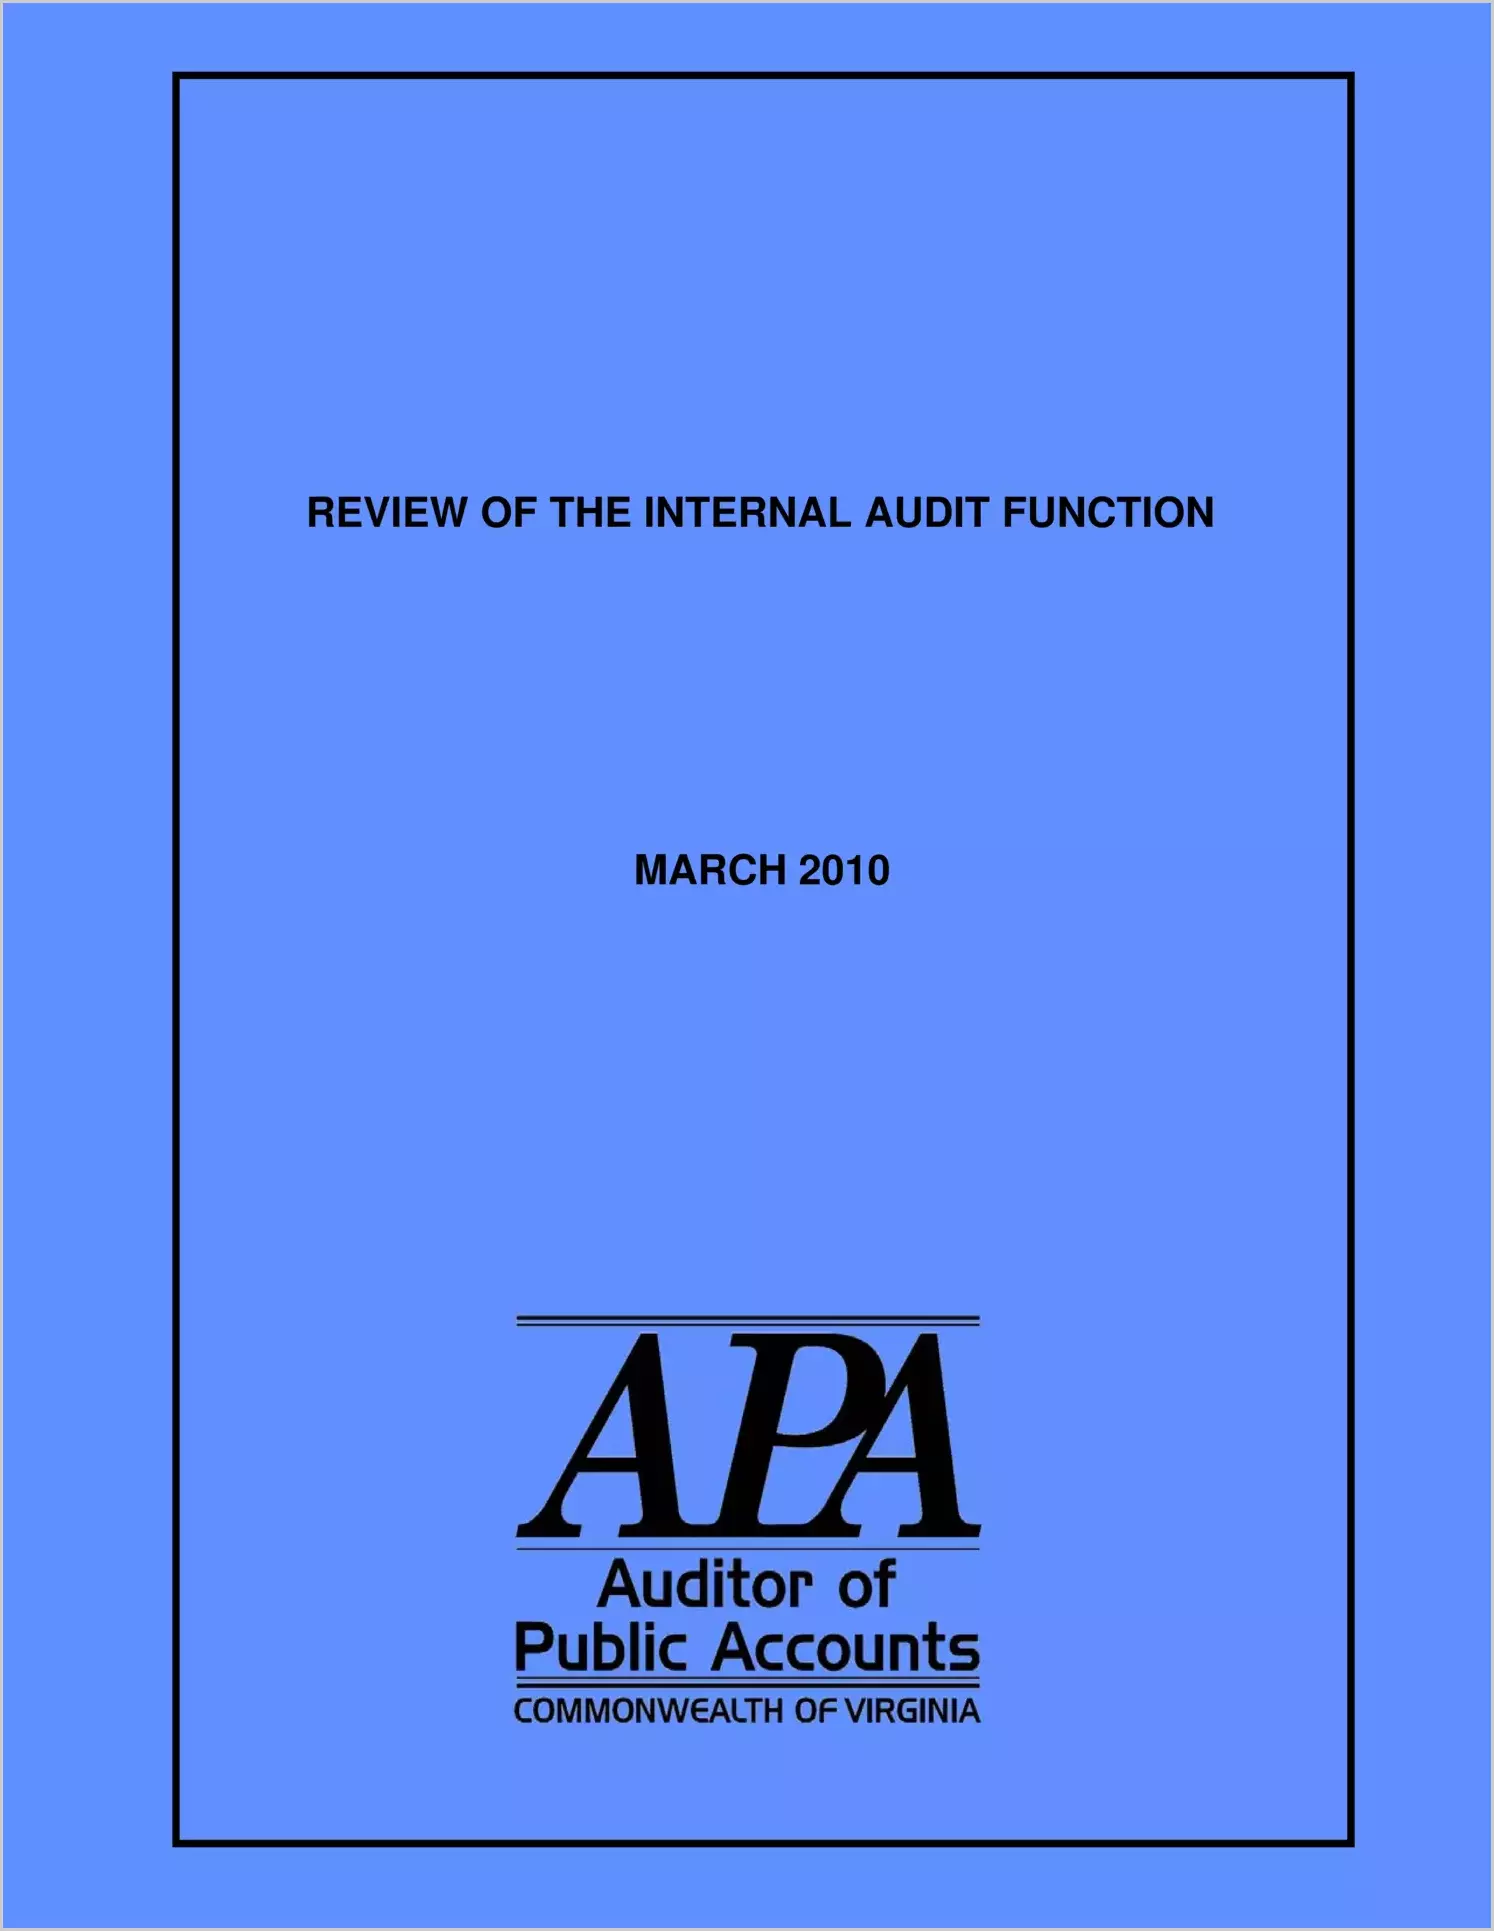 Review of the Internal Audit Function - March 2010